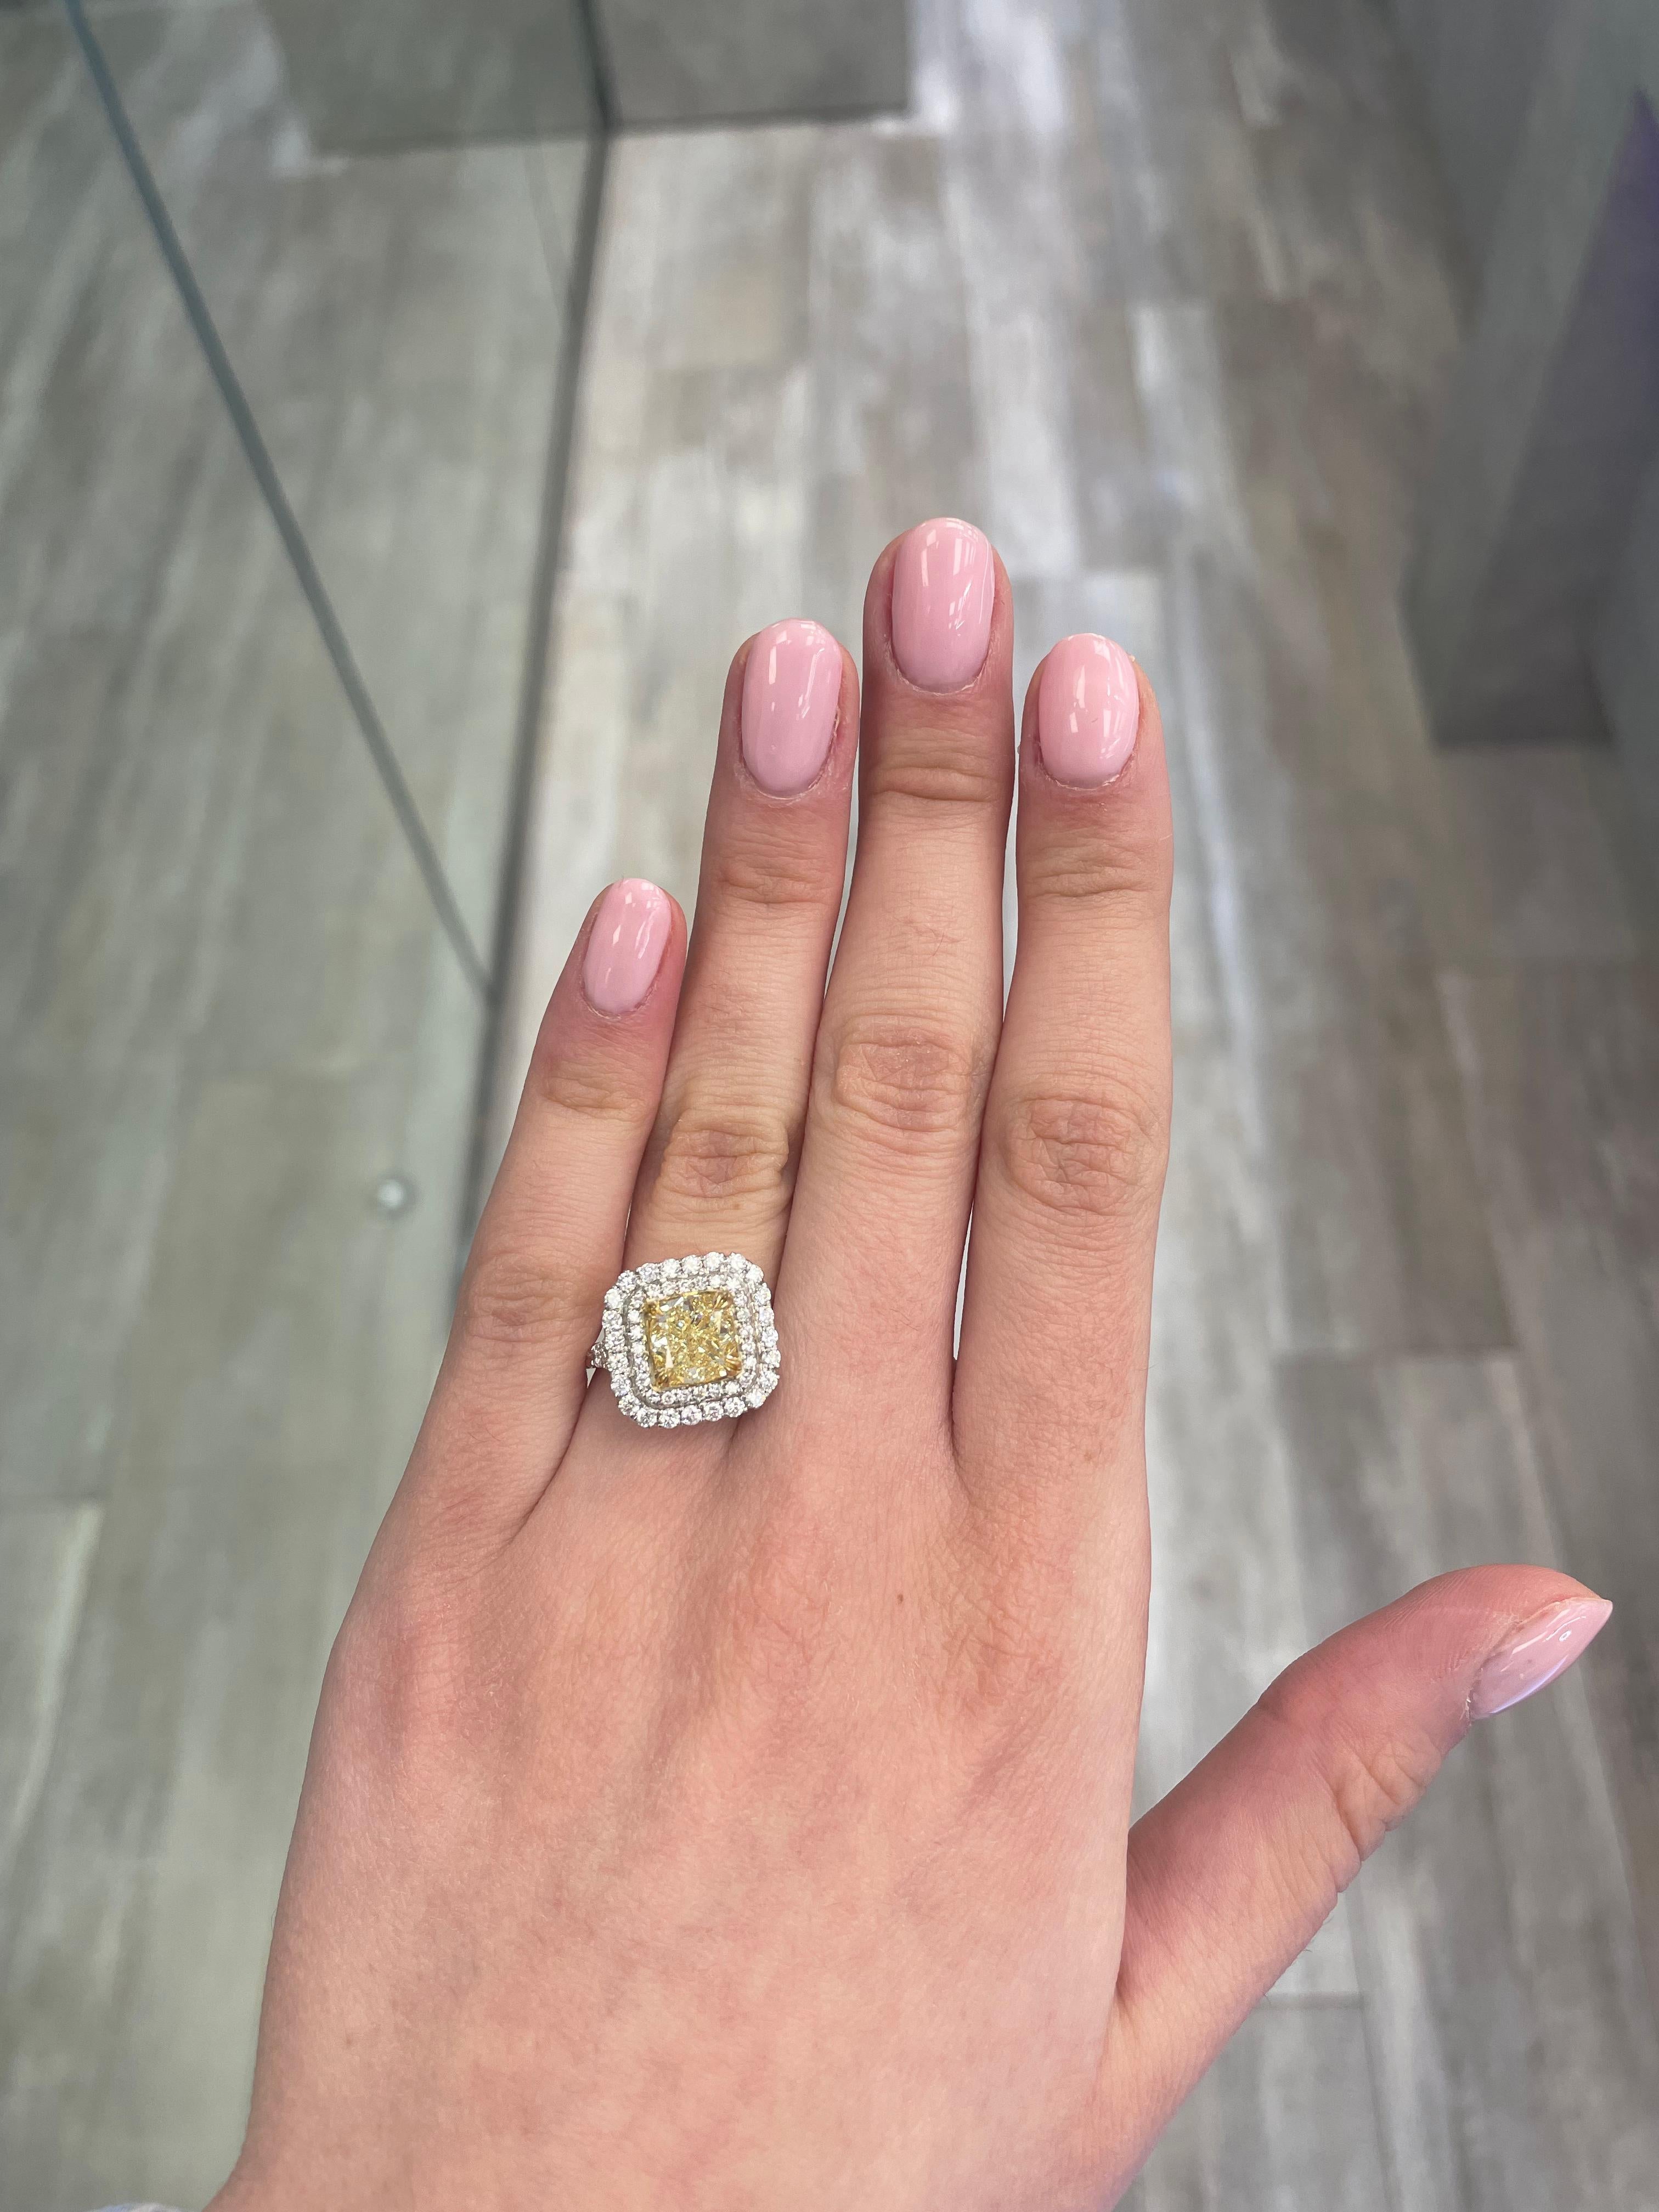 Stunning modern EGL certified fancy intense yellow diamond double halo ring, two-tone 18k yellow and white gold, split shank. By Alexander Beverly Hills
3.25 carats total diamond weight.
2.22 carat cushion cut Fancy Intense Yellow color and VS2